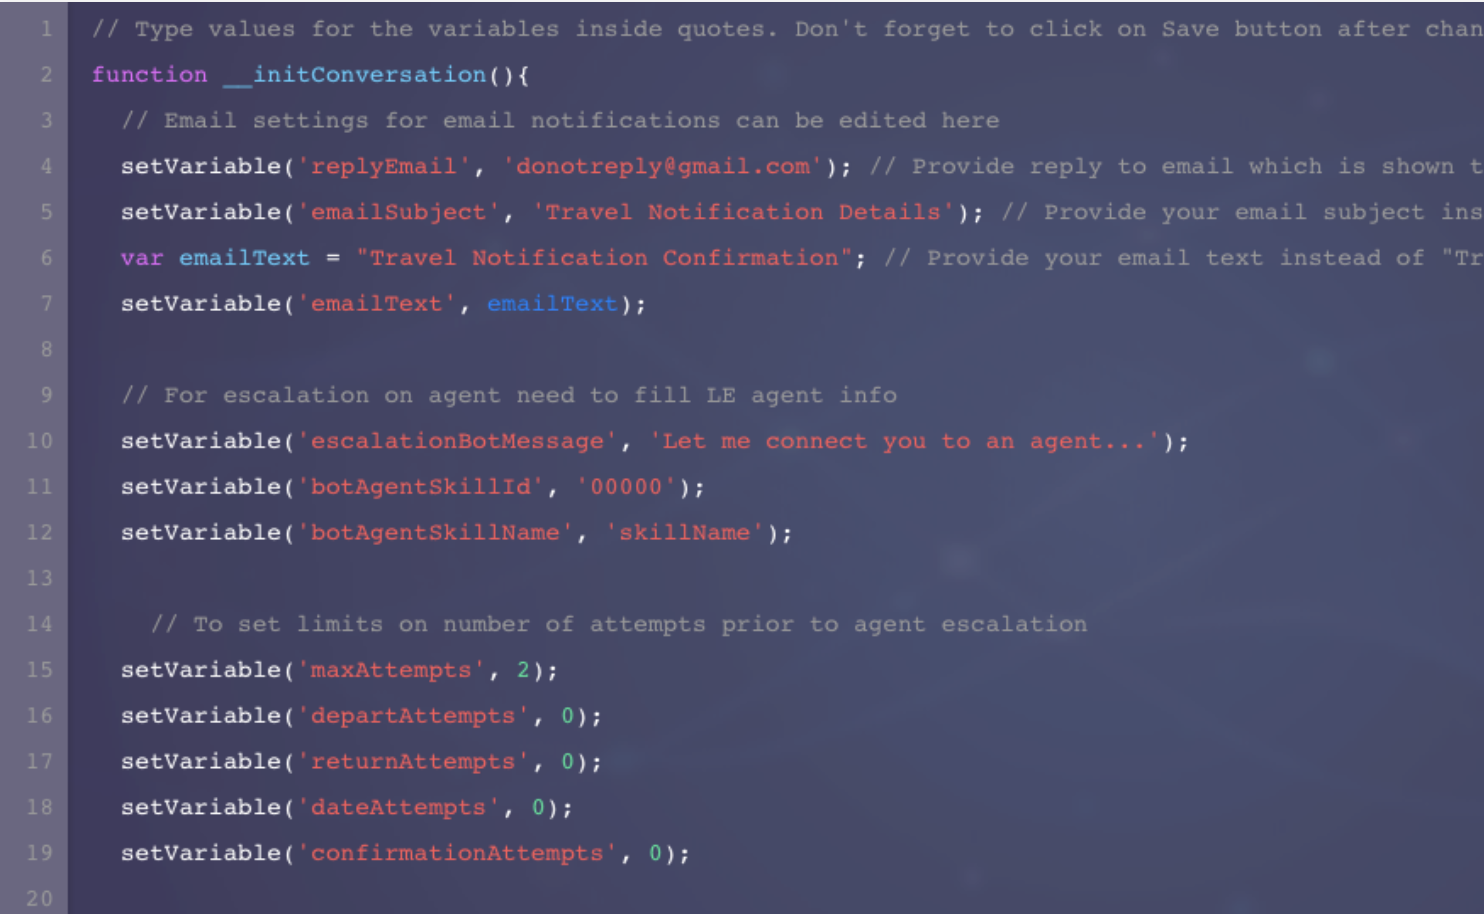 Some of the code for the initConversation function on the Global Functions page in the bot